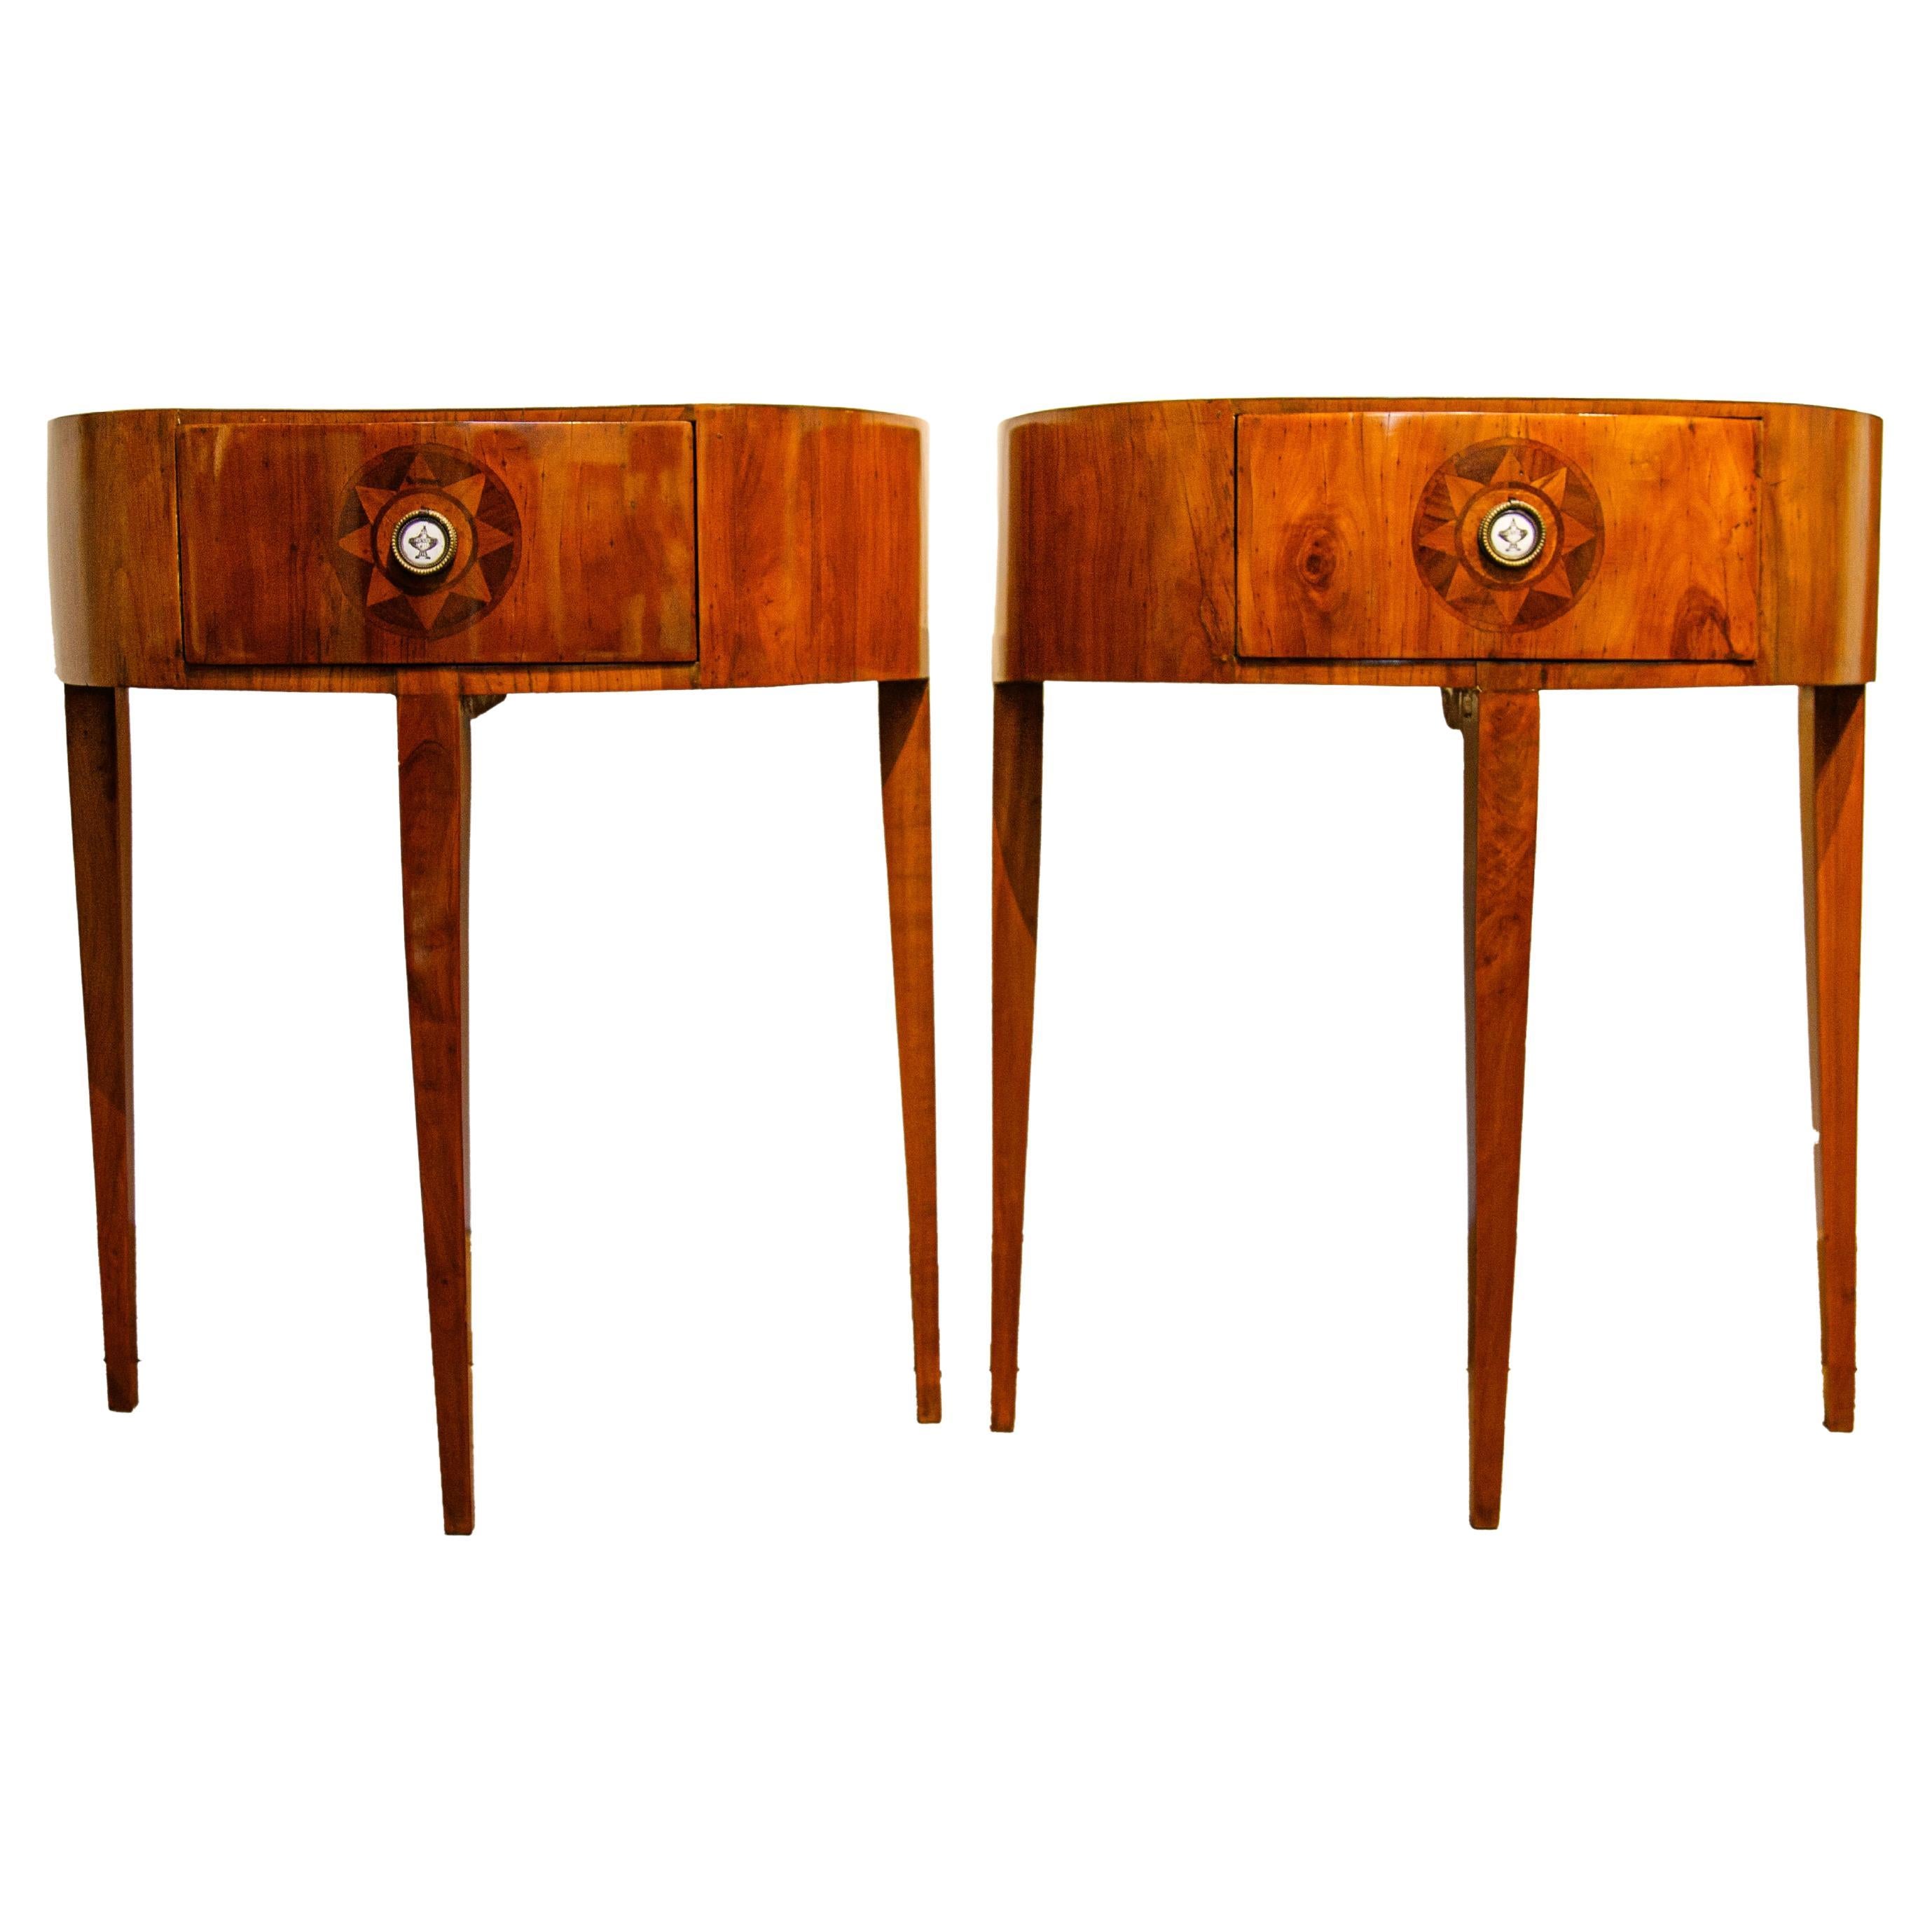 Vicenza, pair of wooden half-moon bedside tables, late 18th century